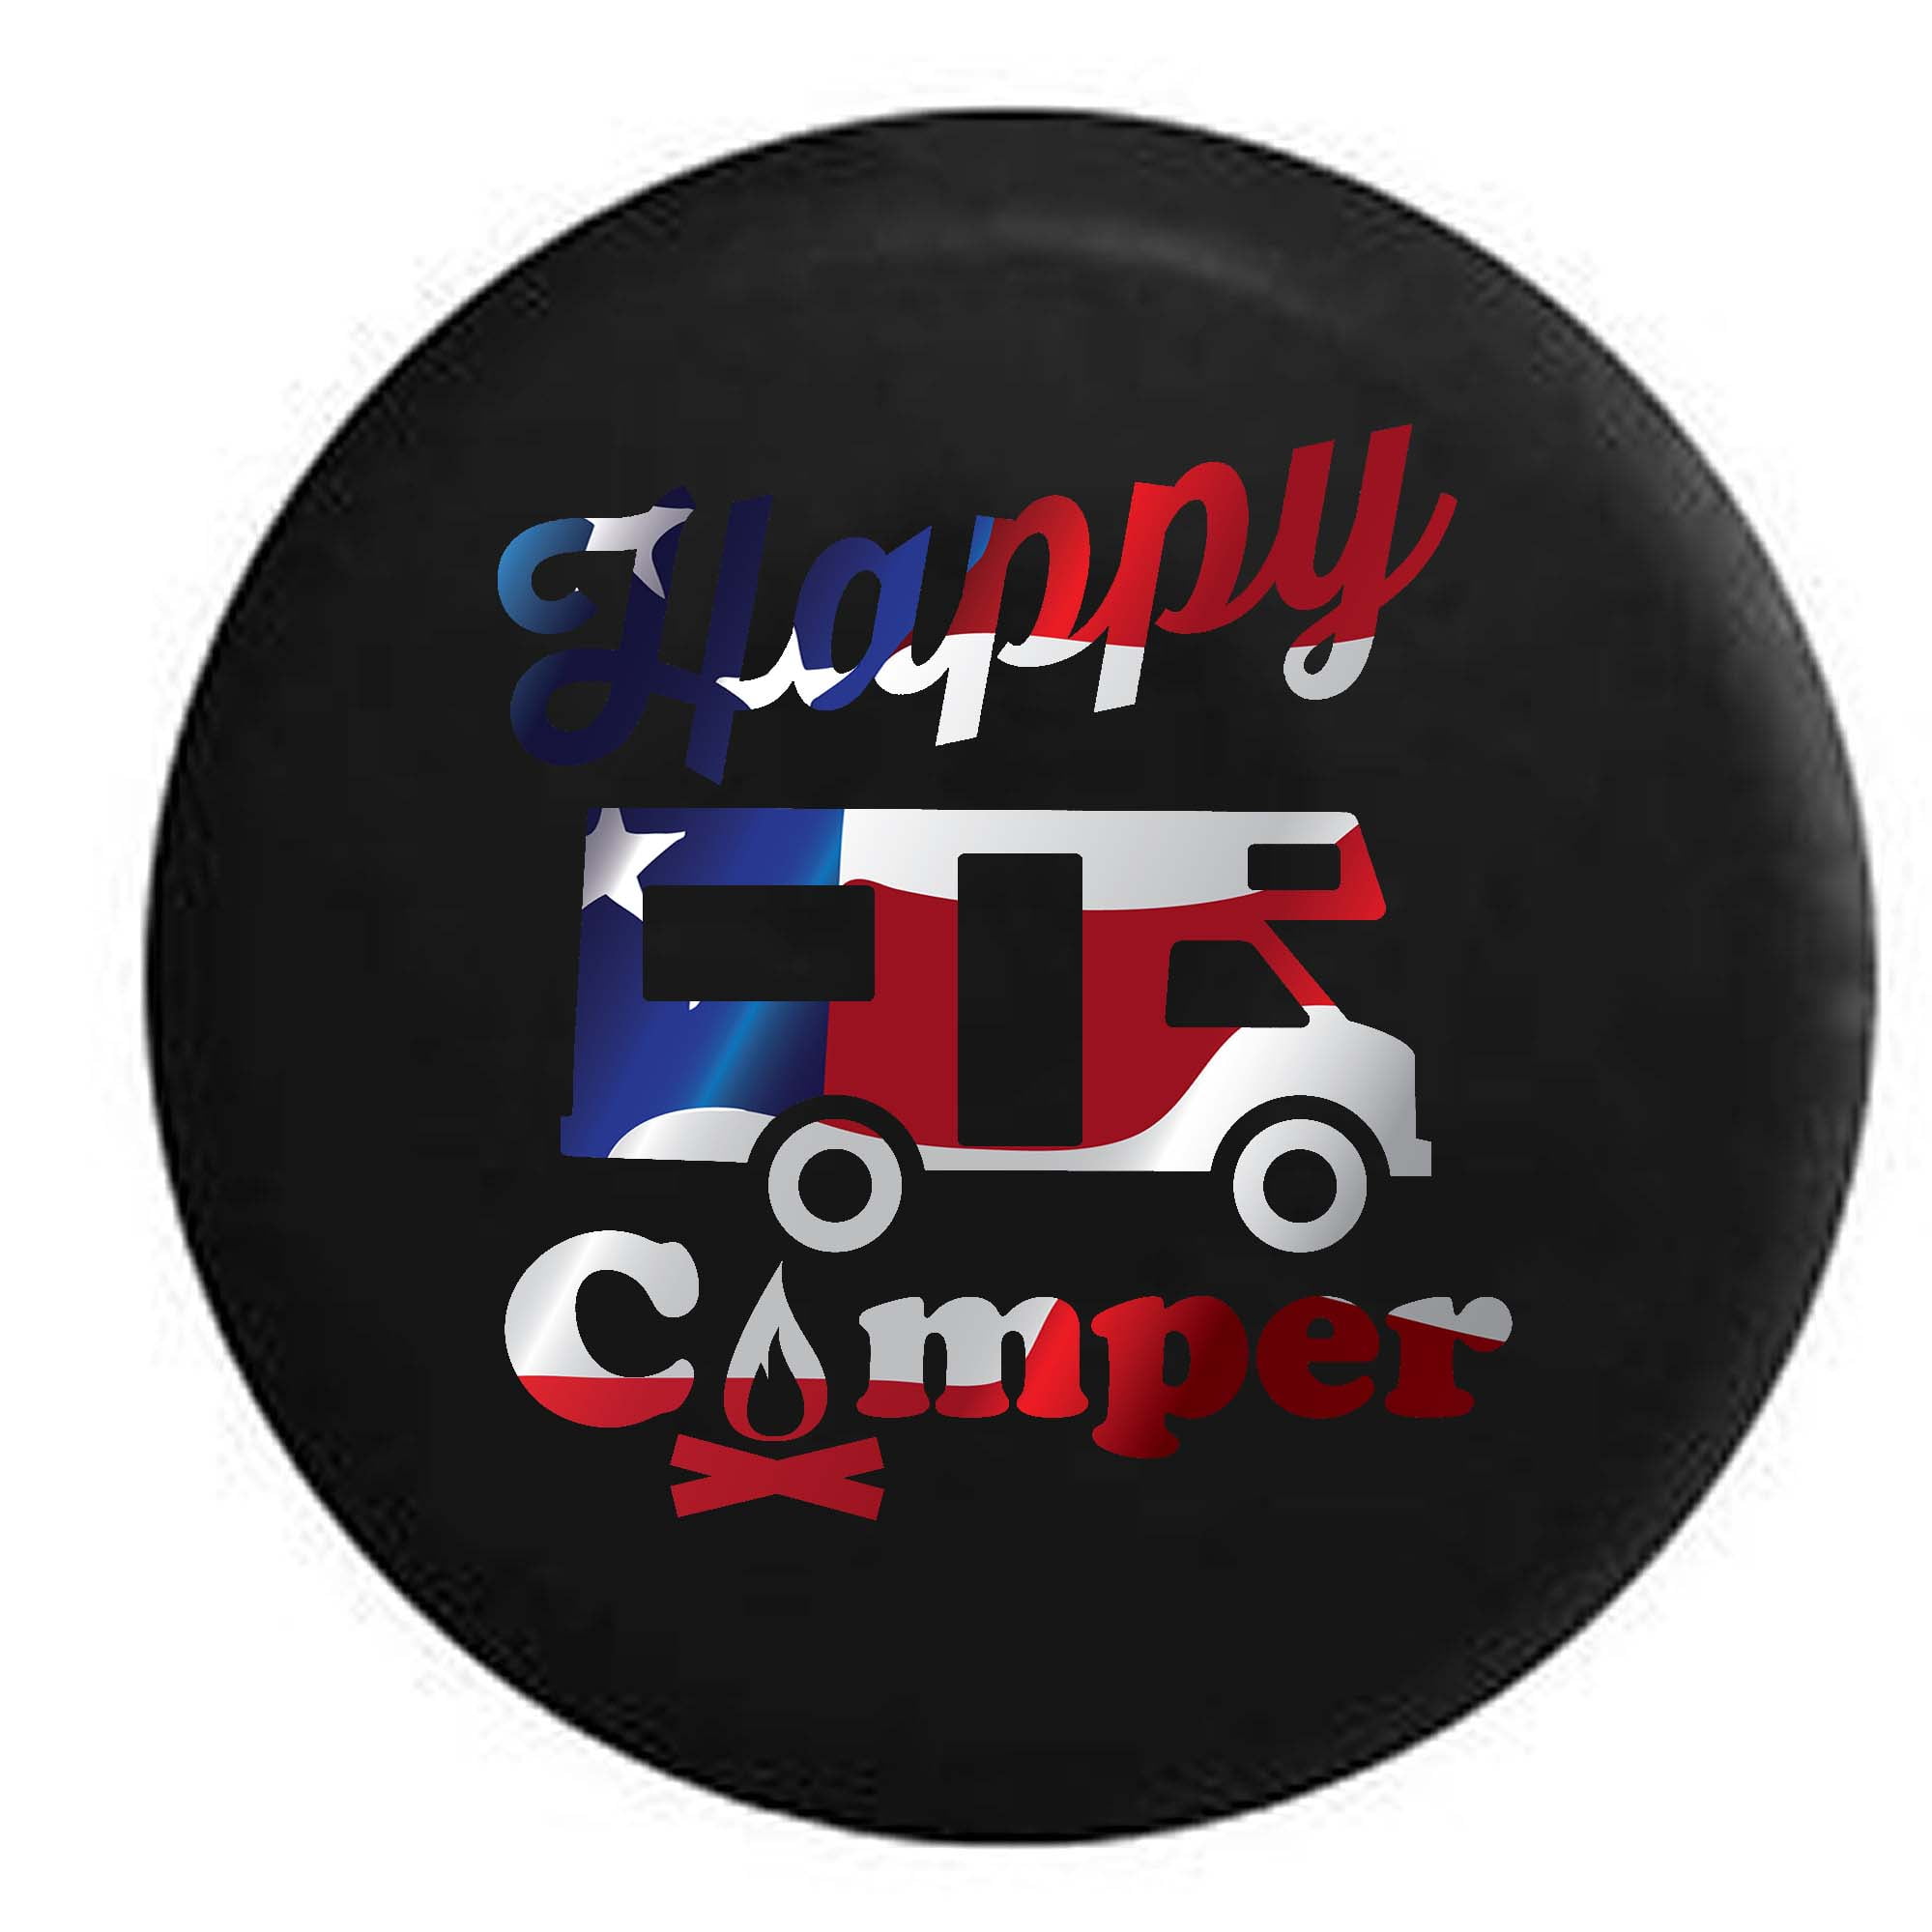 Pike Stealth Lifes Better Around a Campfire Camping Trailer RV Spare Tire Cover OEM Vinyl Black 27.5 in Pike Outdoors